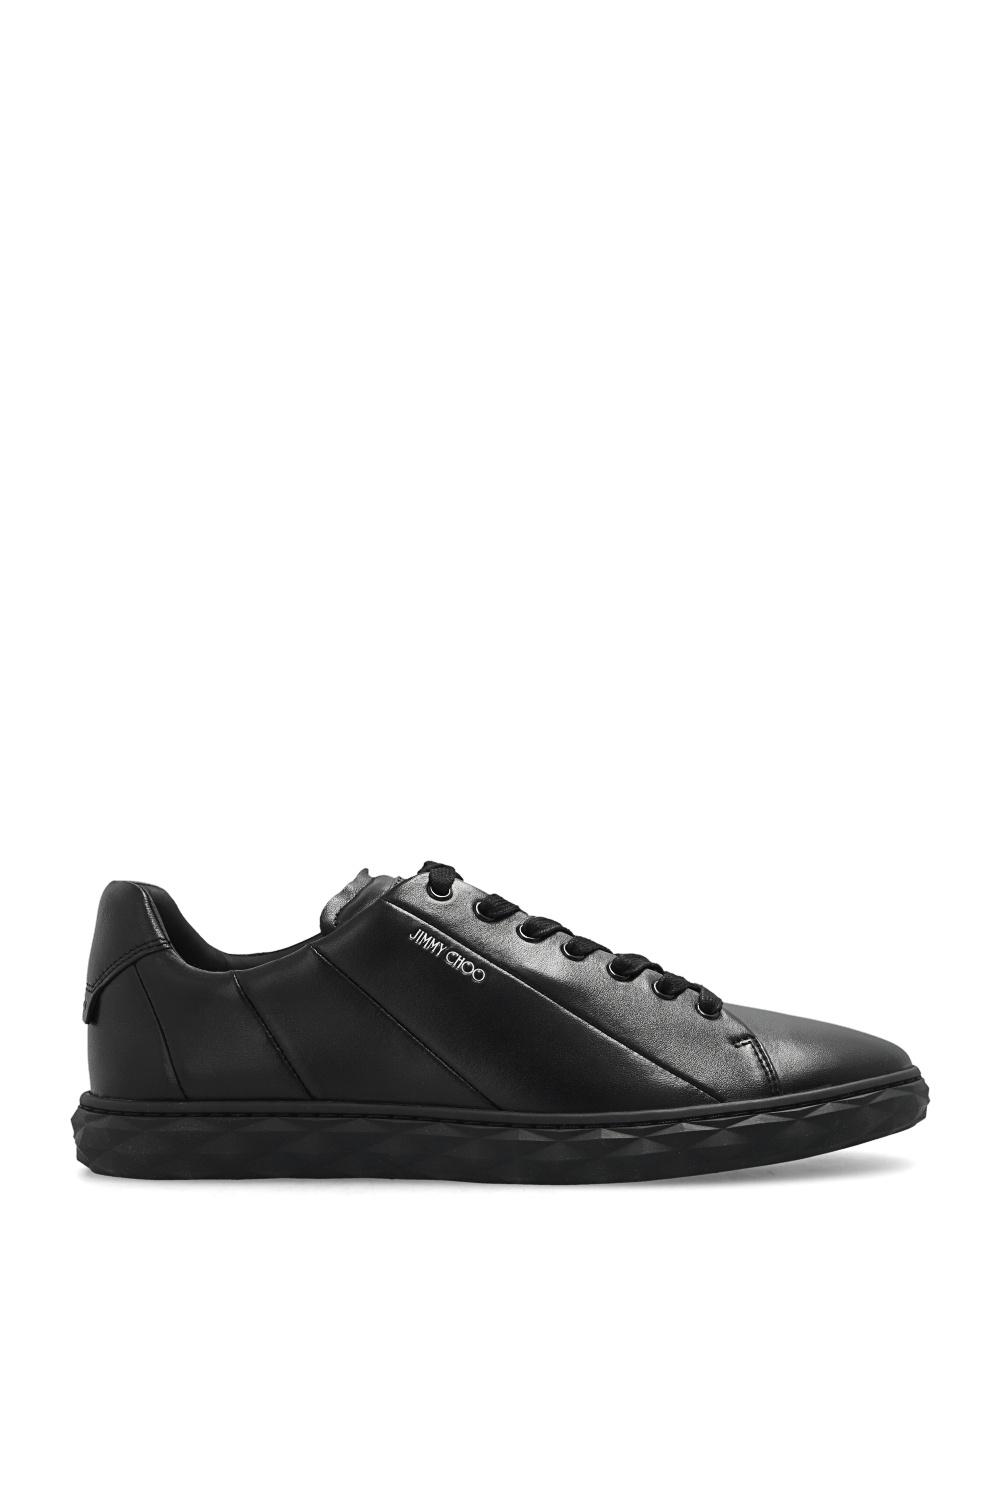 Mens Trainers Jimmy Choo Trainers for Men Black Save 7% Jimmy Choo Leather Diamond Light Sneakers in Black Black 